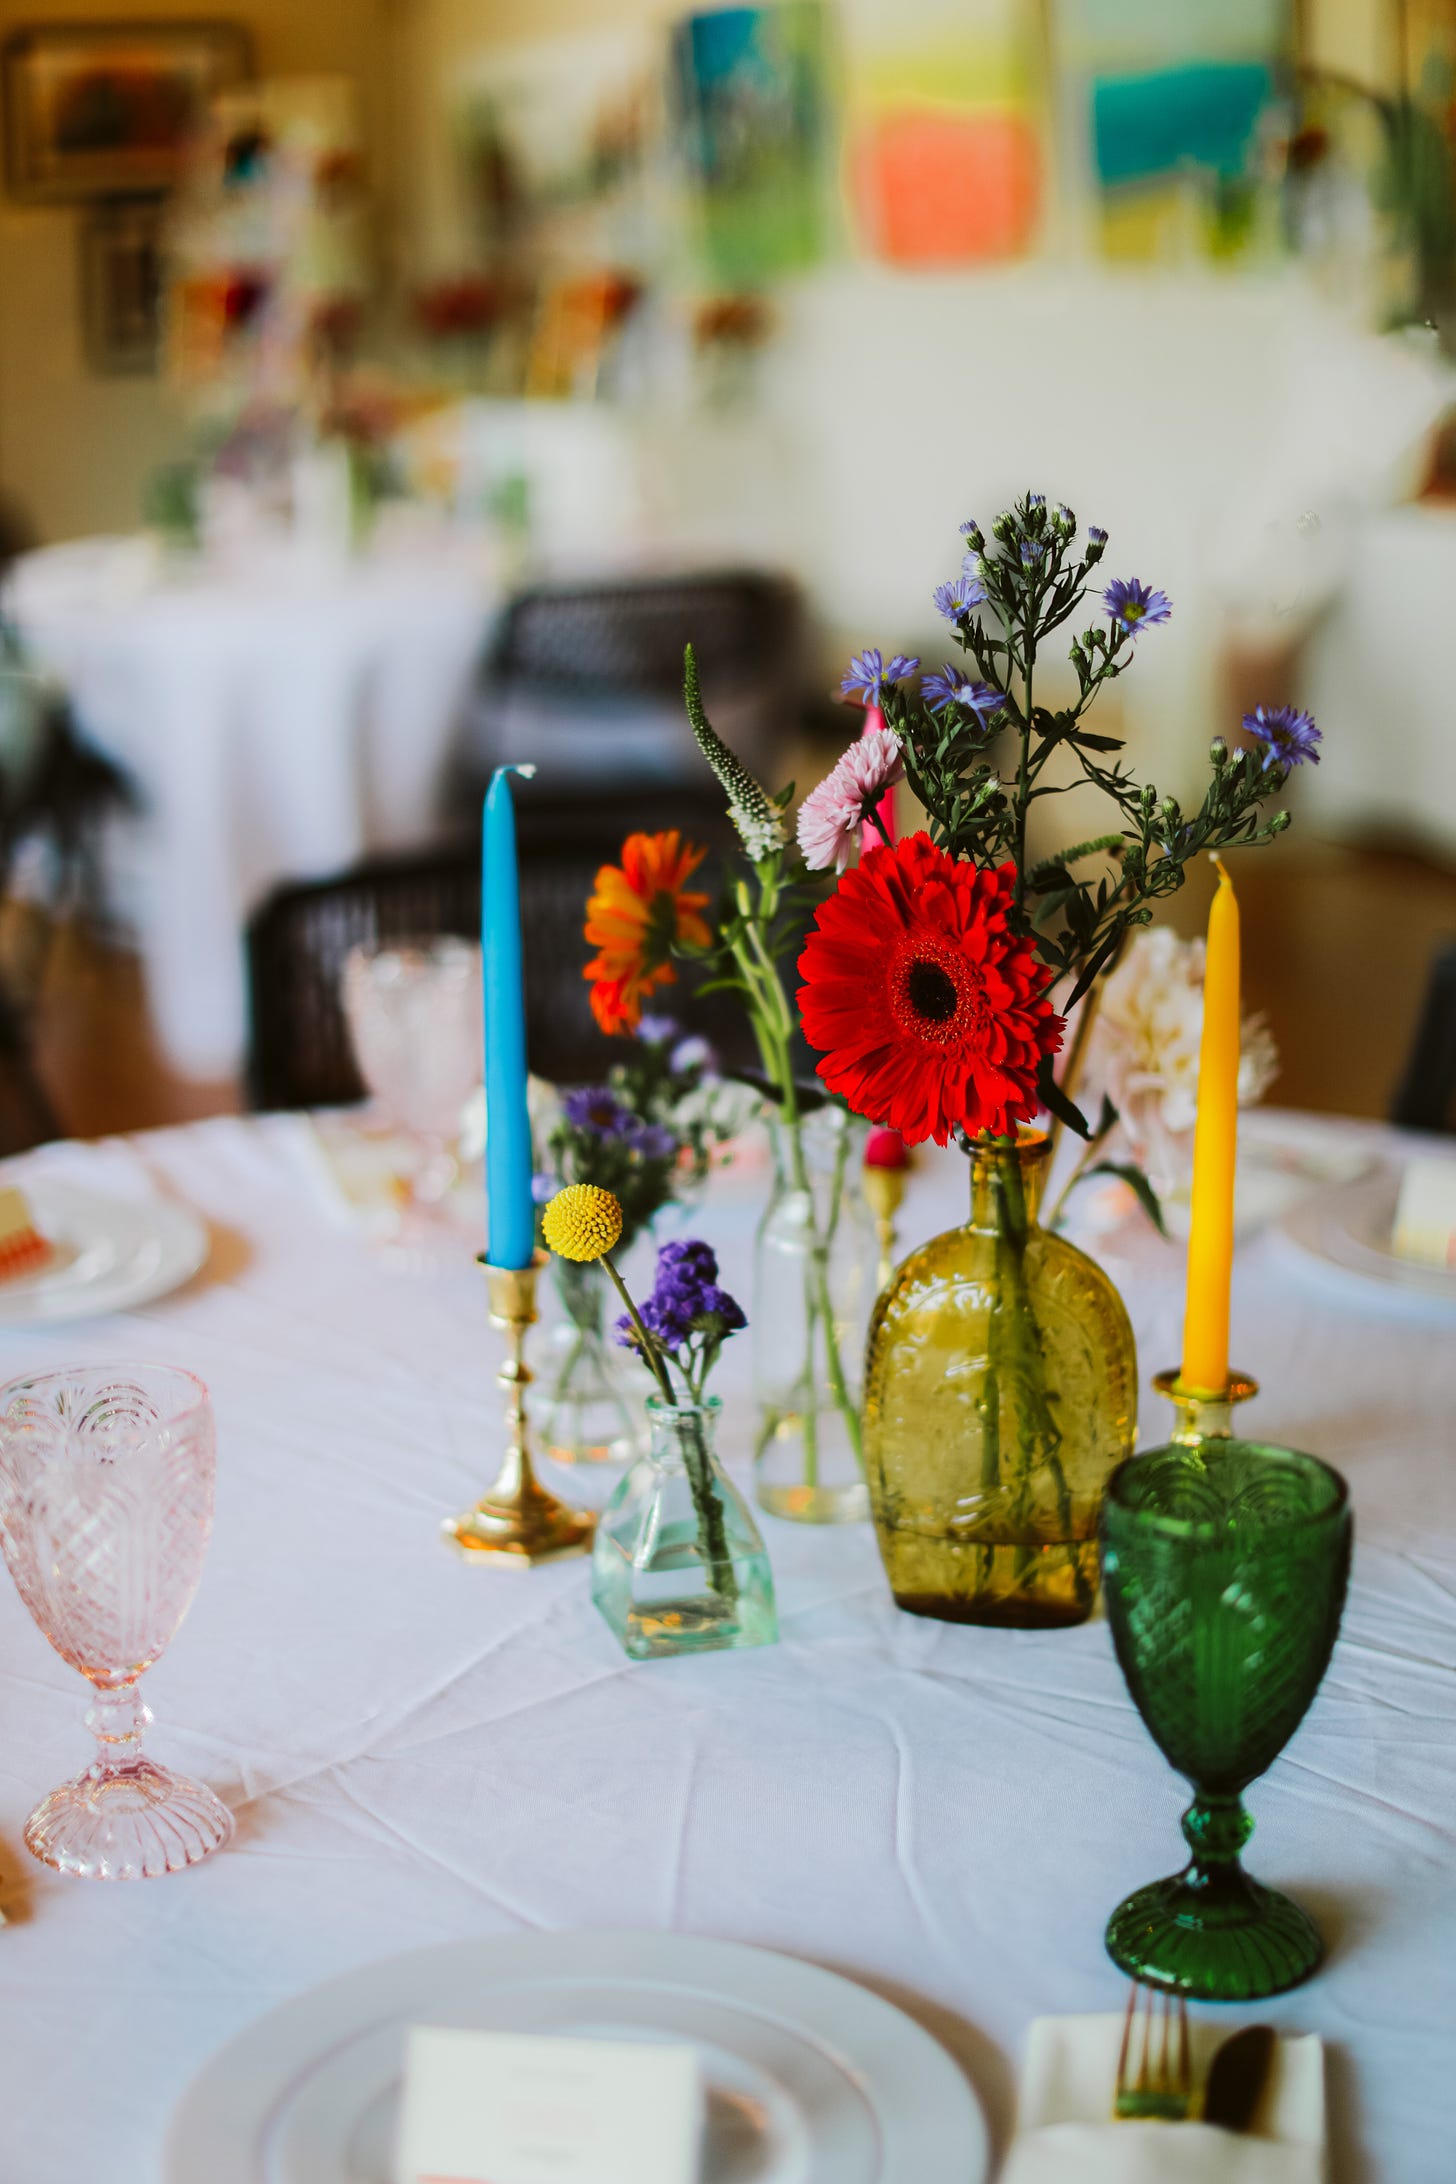 Assortment of bright, wild looking flowers in bright colored vases with multicolored candlesticks on top of a table at a reception.